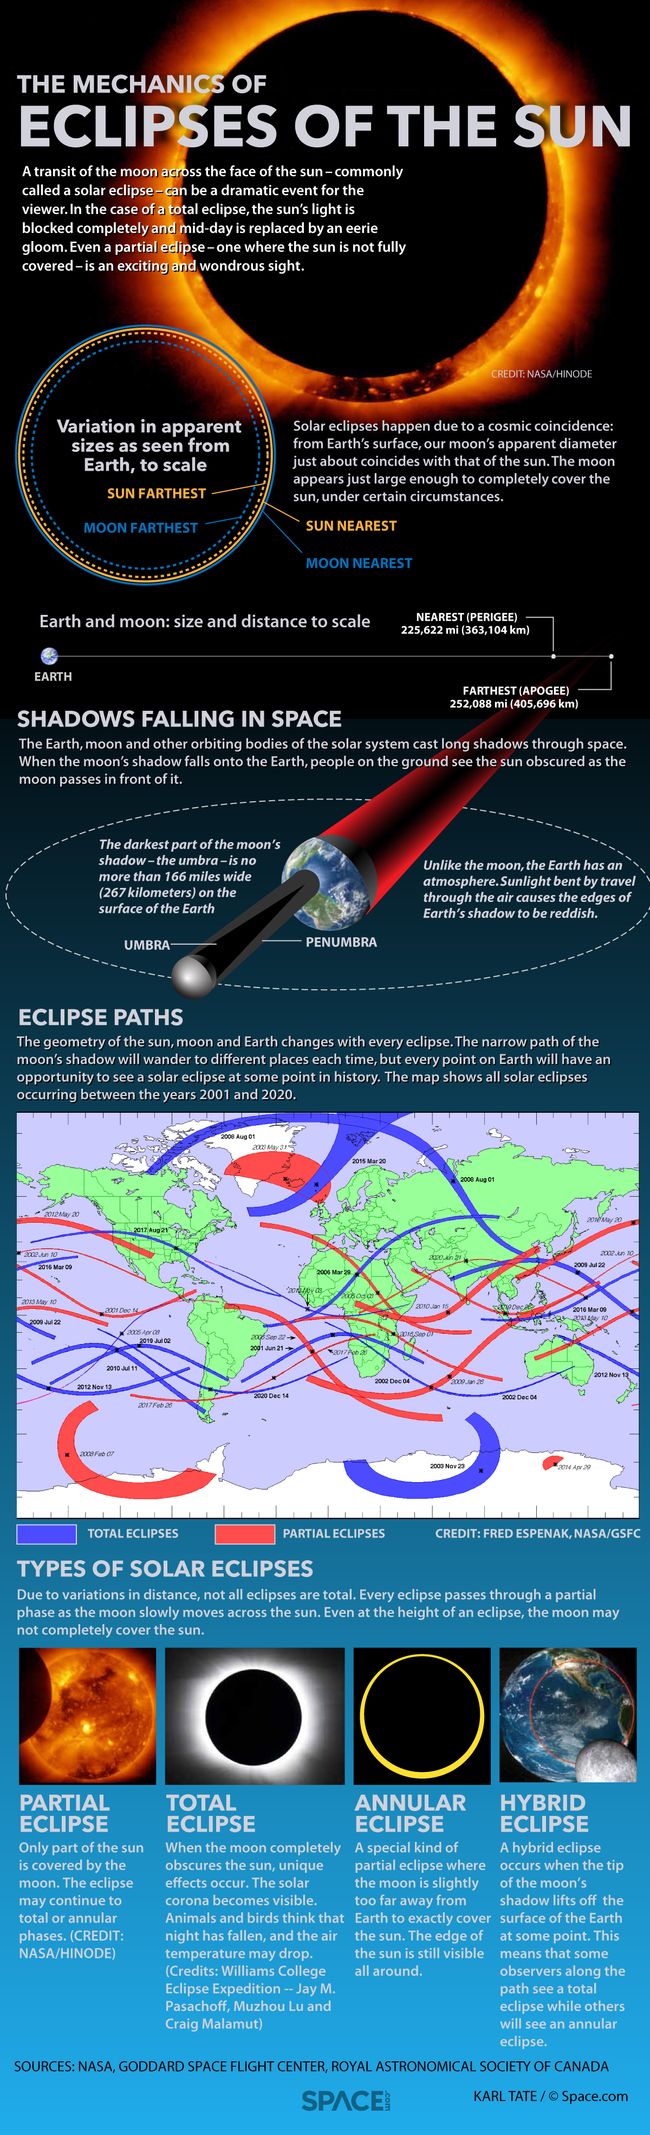 Total Solar Eclipses How Often Do They Occur (and Why)? Space